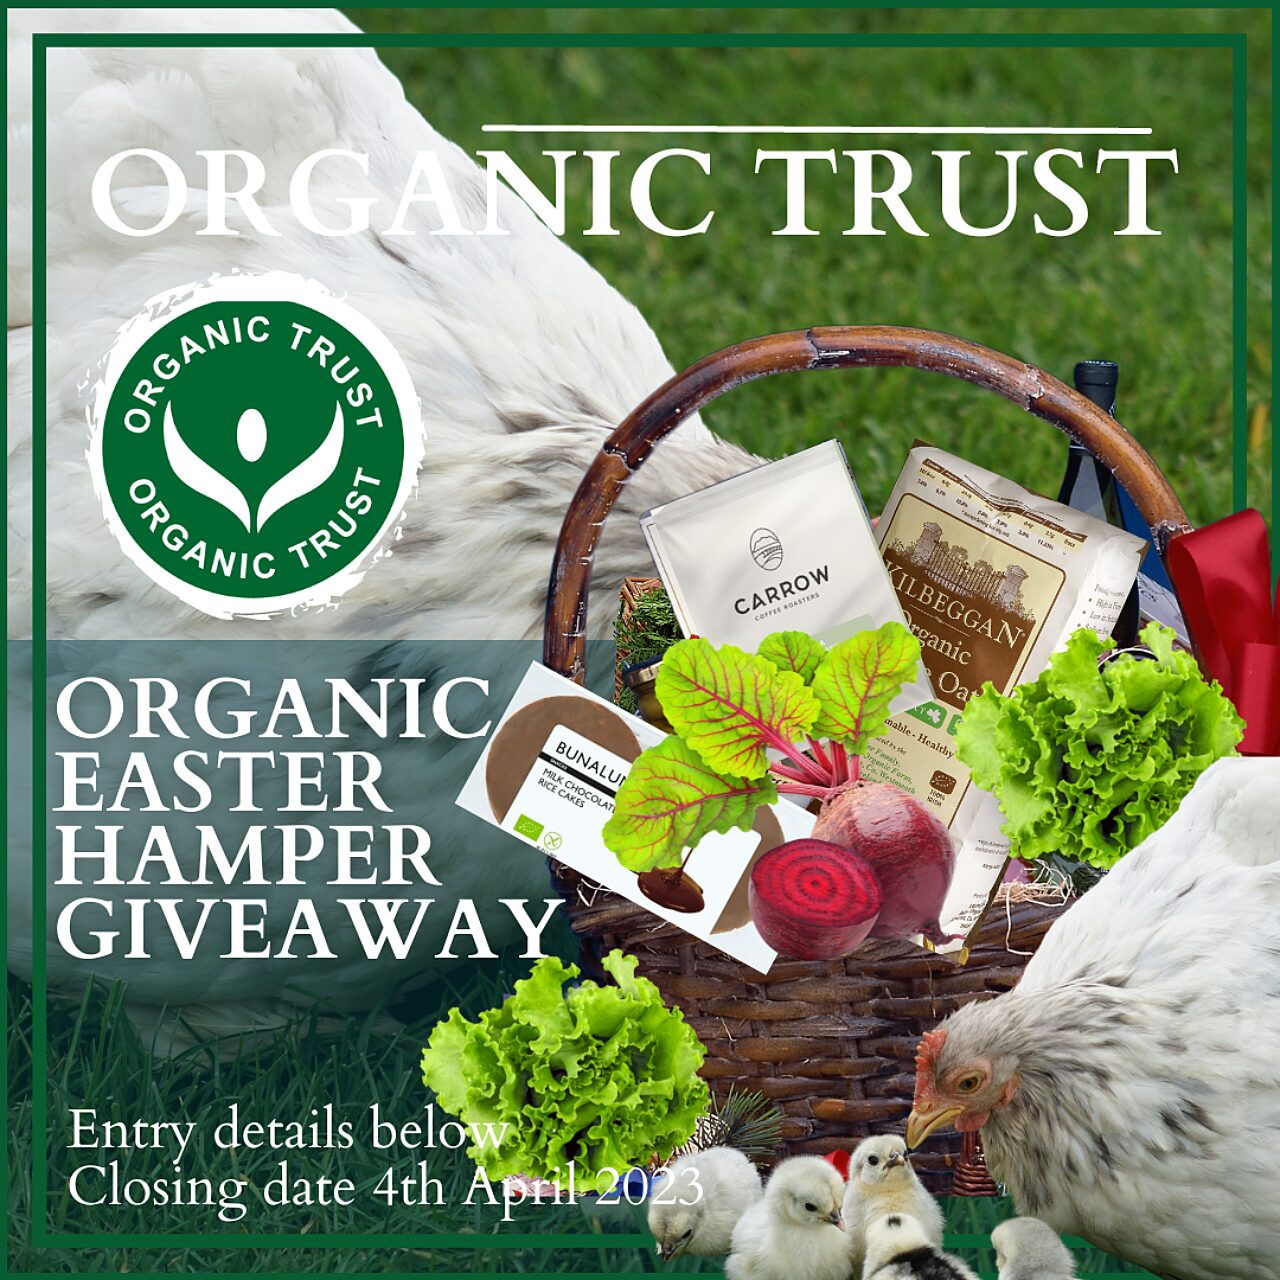 2nd draft o RGANIC t RUST easter hamper and chickens